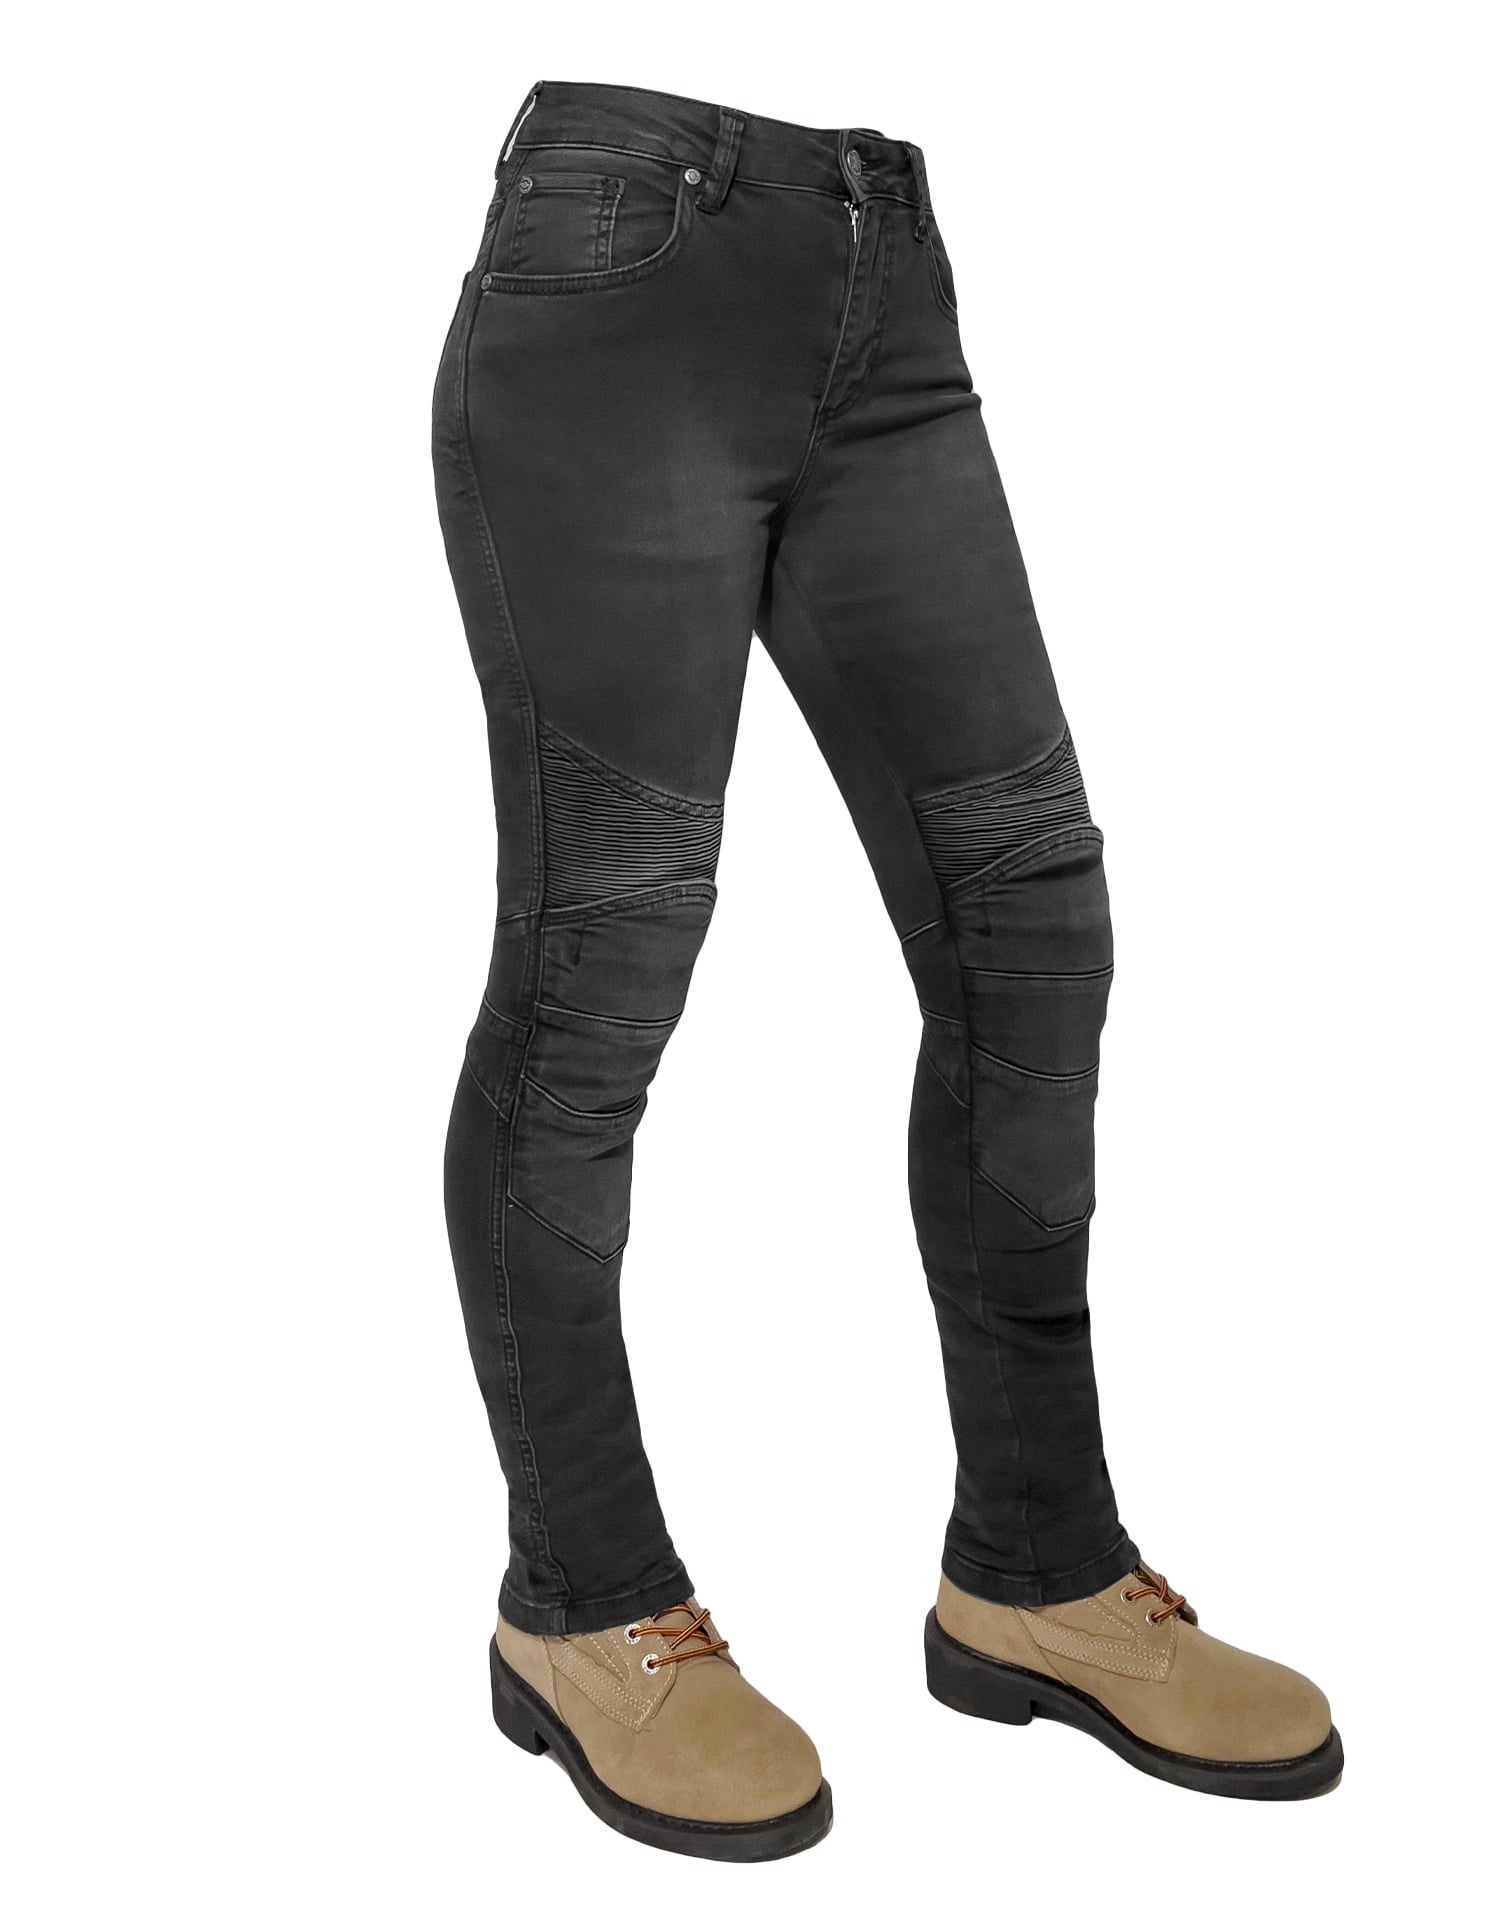 LOMENG Motorcycle Riding Pants Motocross Ricing Jeans India | Ubuy